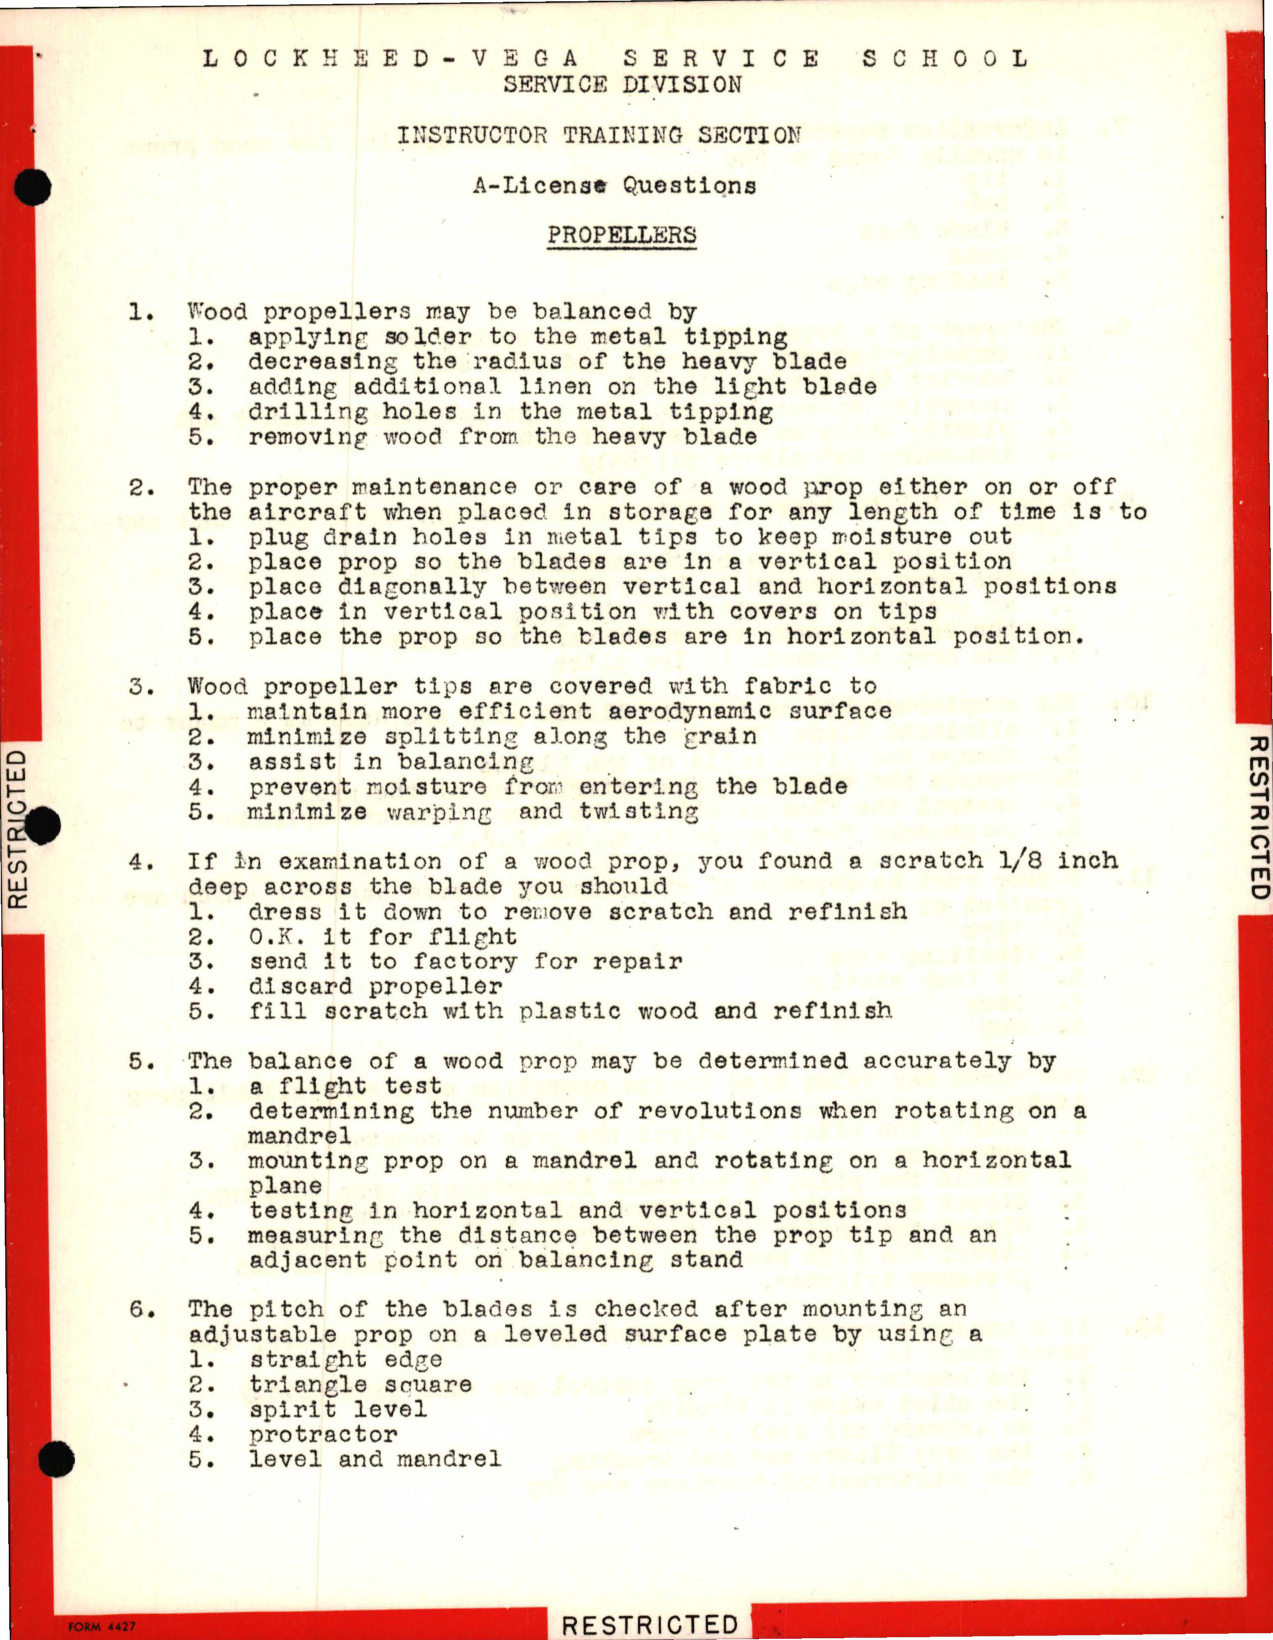 Sample page 1 from AirCorps Library document: Instructor Training Questions for Propellers - Lockheed-Vega Service School